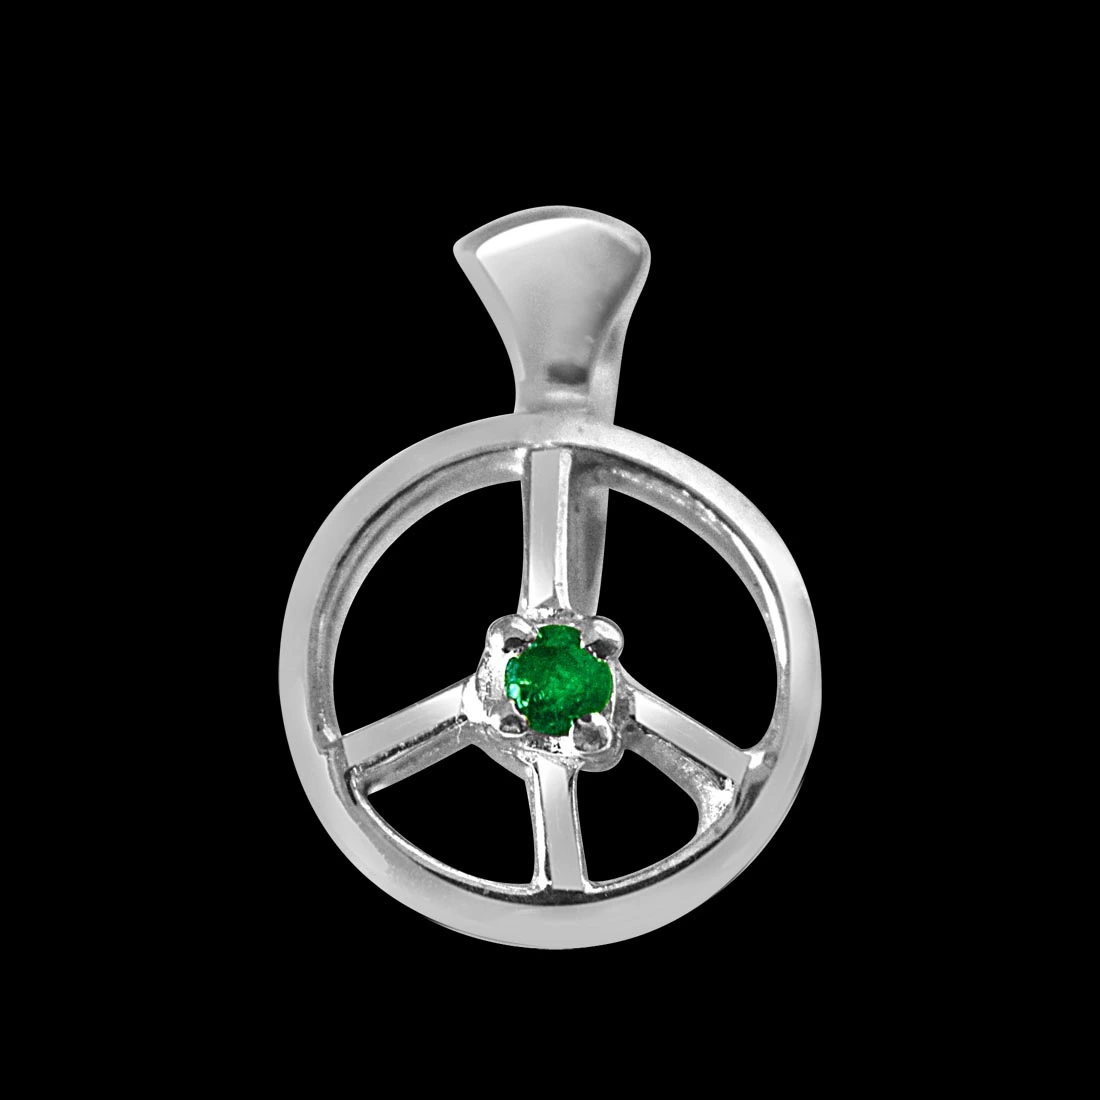 Emerald Wheel - Real Emerald & 925 Sterling Silver Pendant with 18 IN Chain (SDP233)